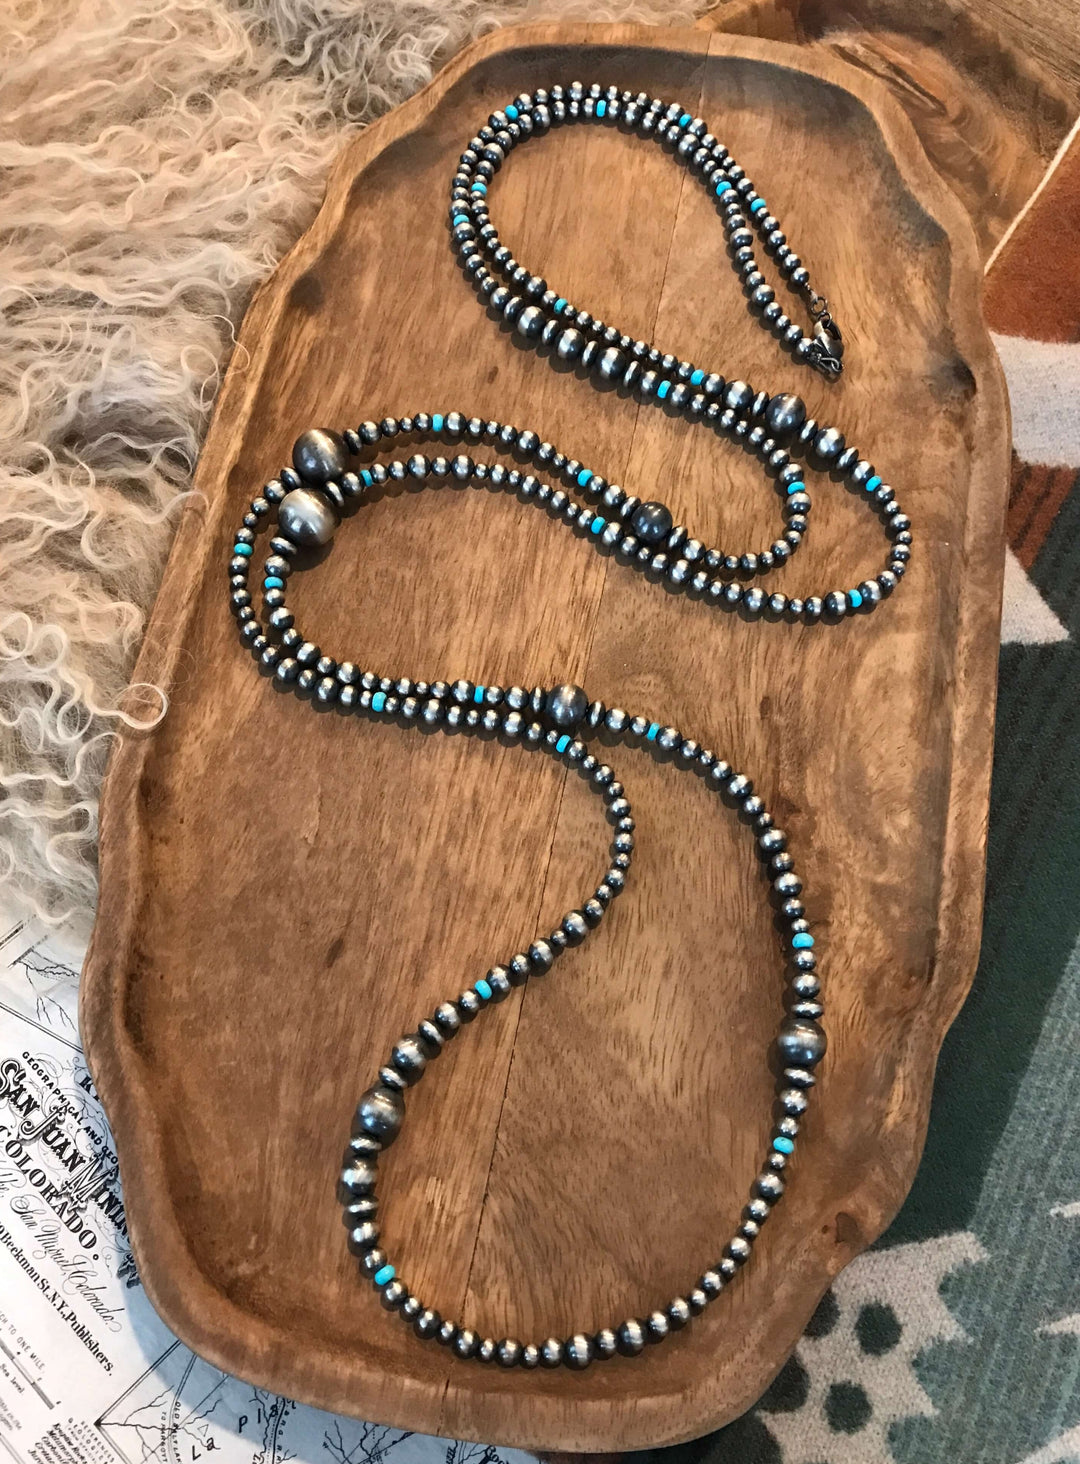 17 Single Strand Sterling Silver Navajo Pearls Beaded Necklace by Art